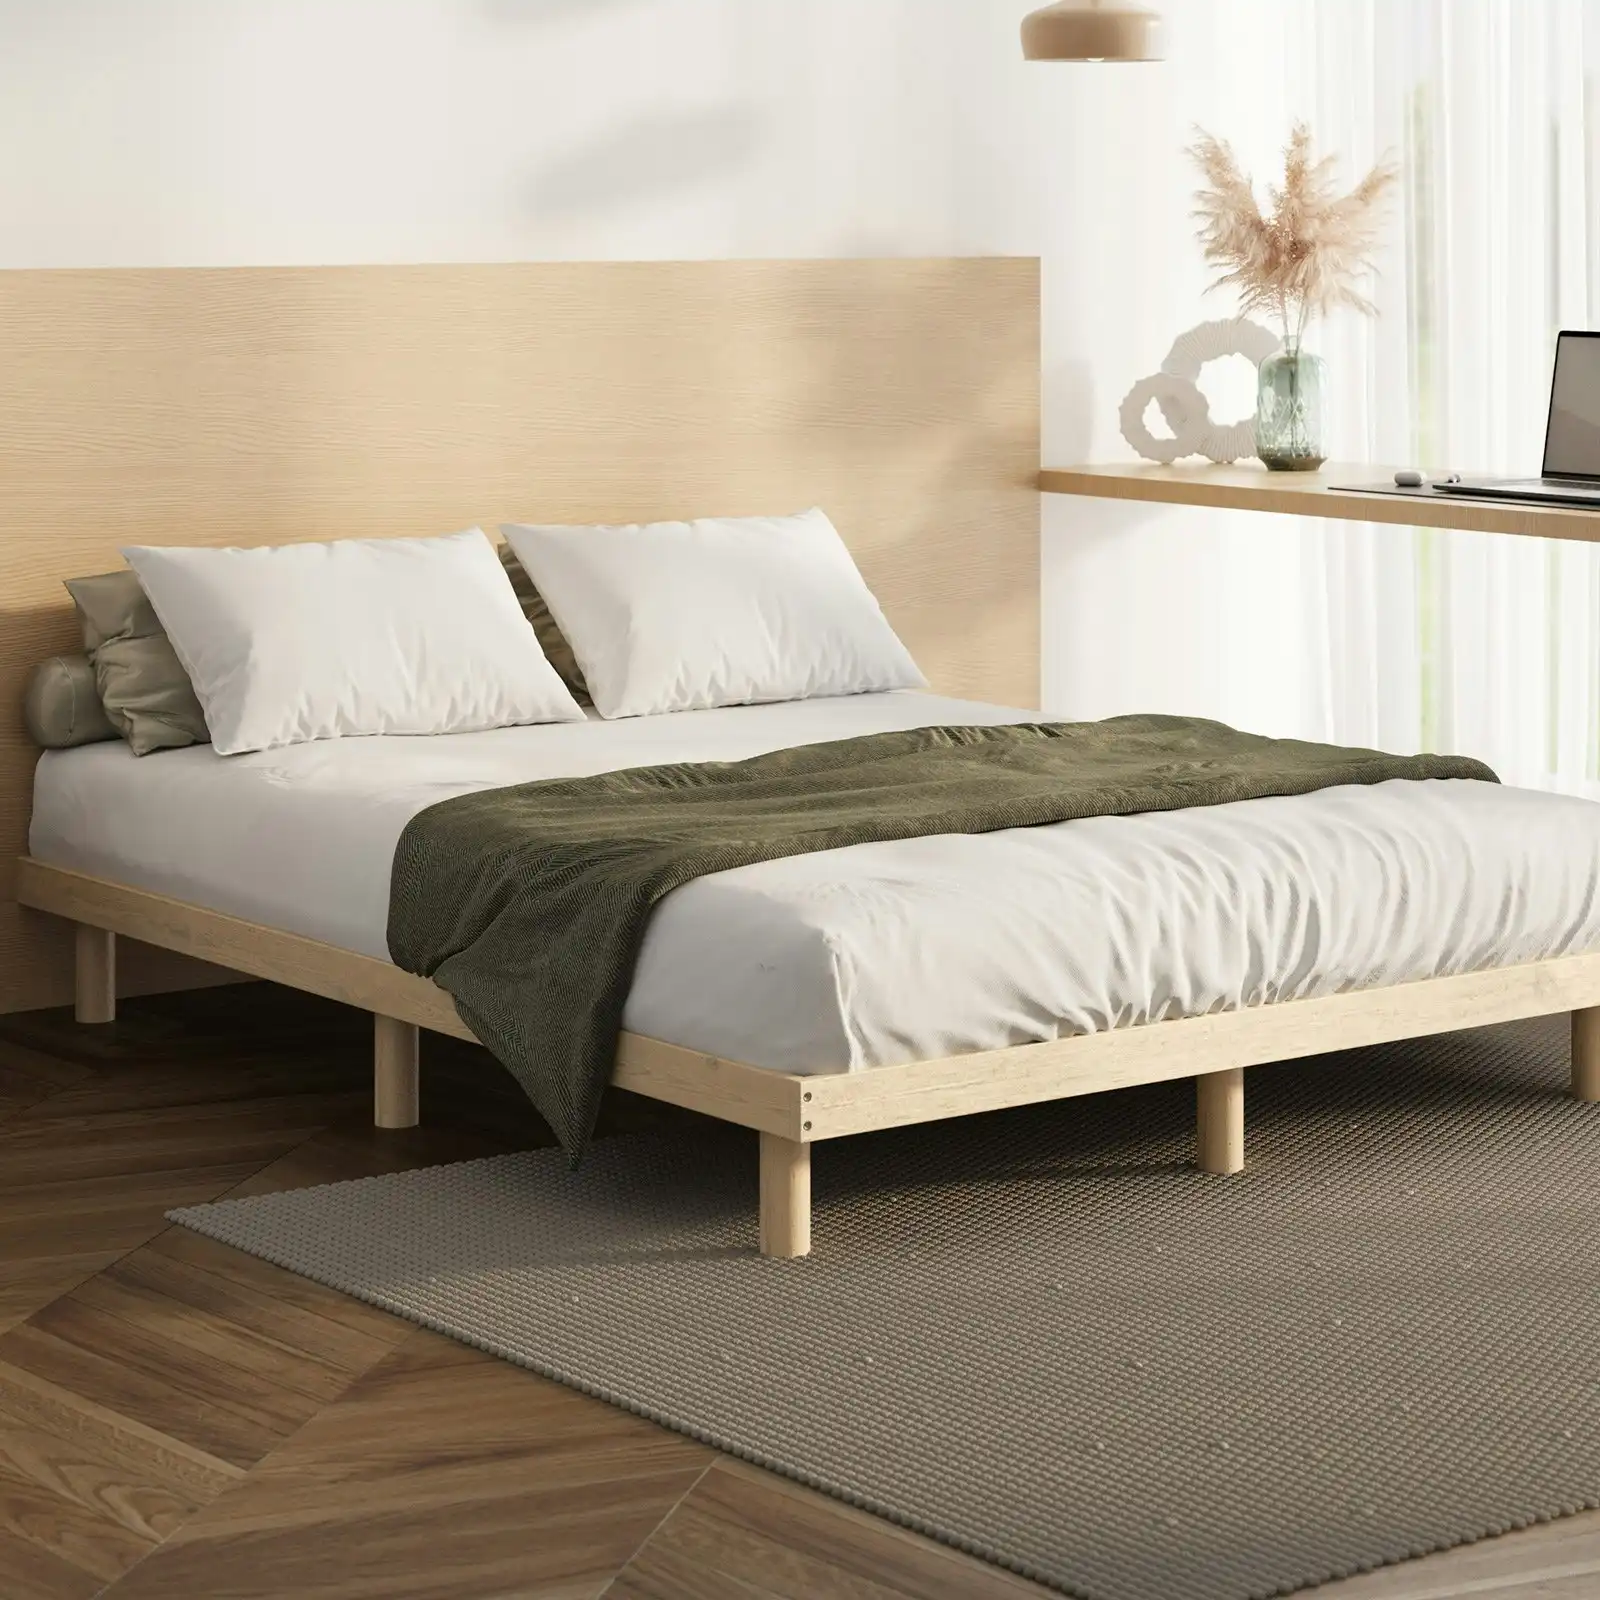 Oikiture Bed Frame Double Size Wooden Base Bed Platform